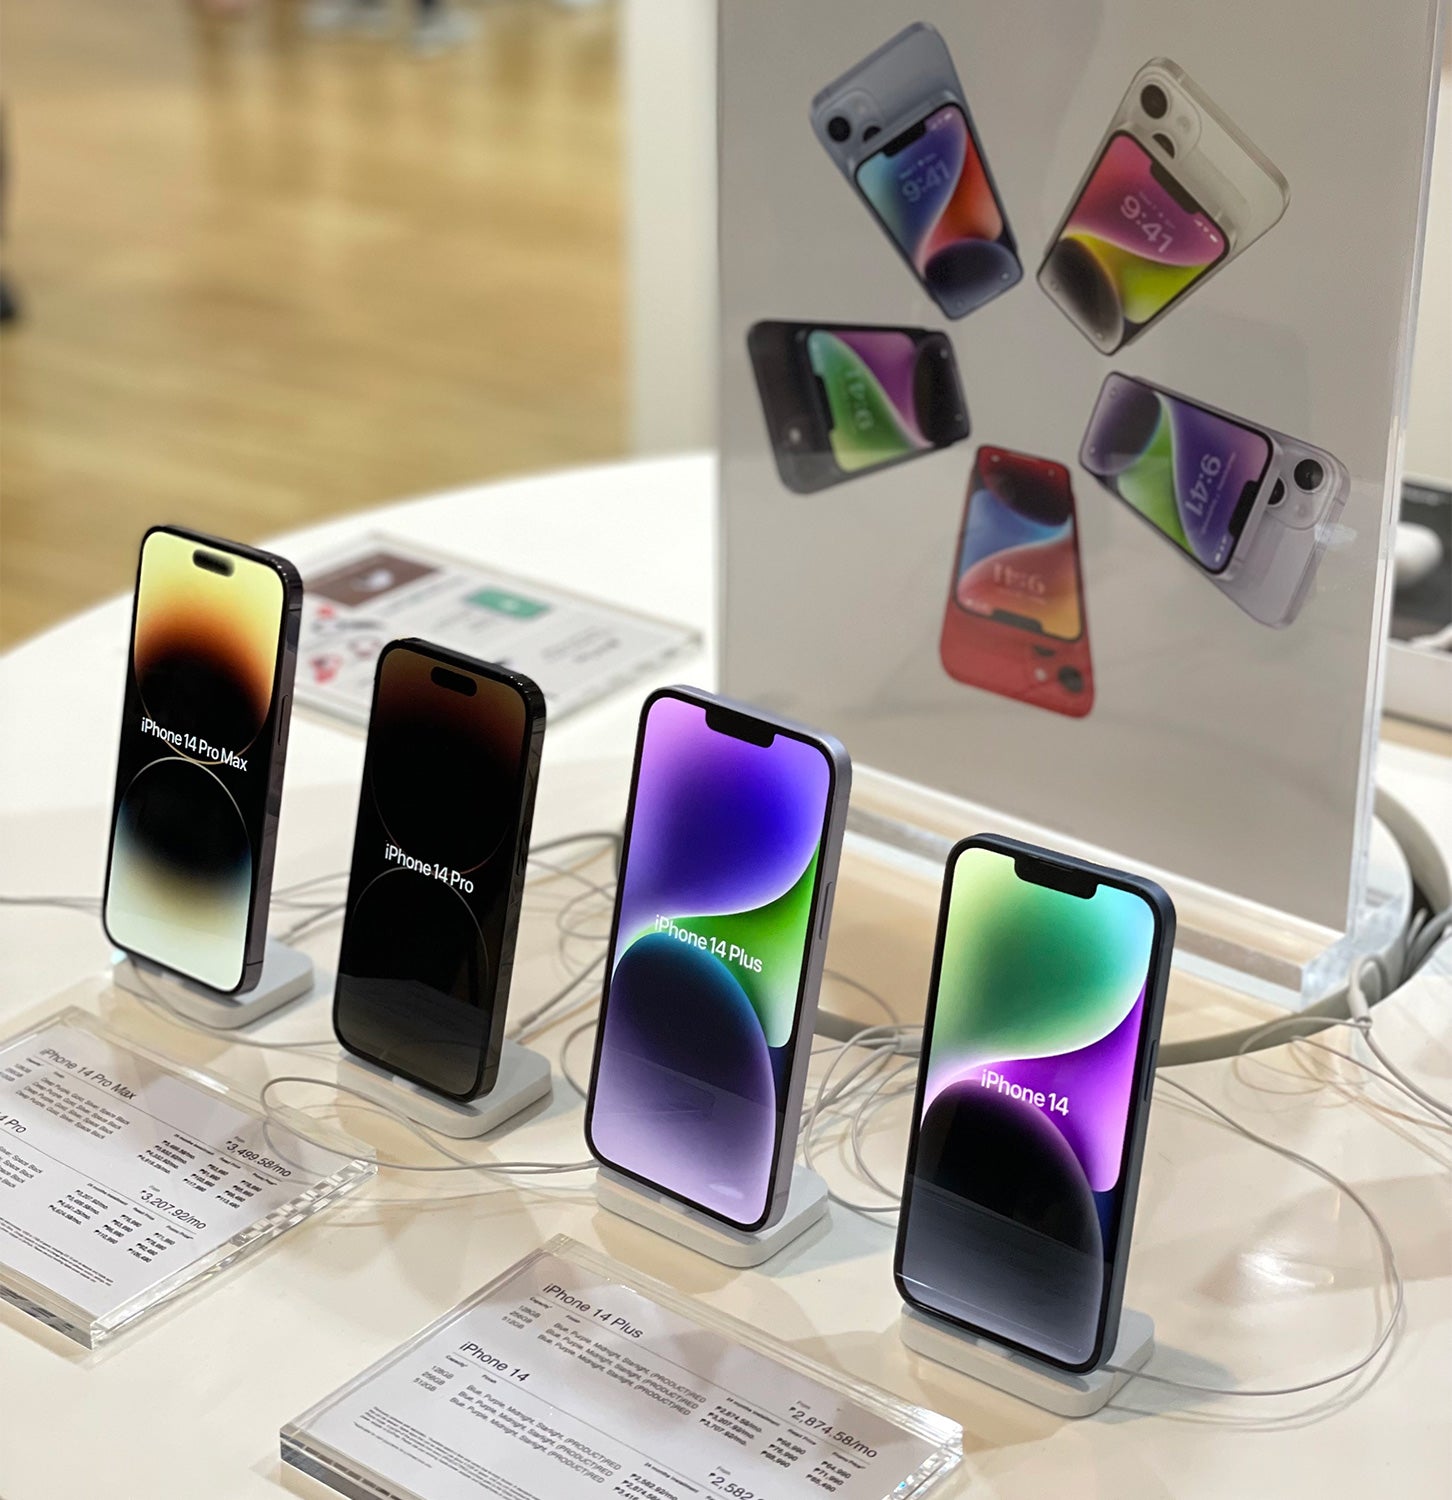 iPhone products on display